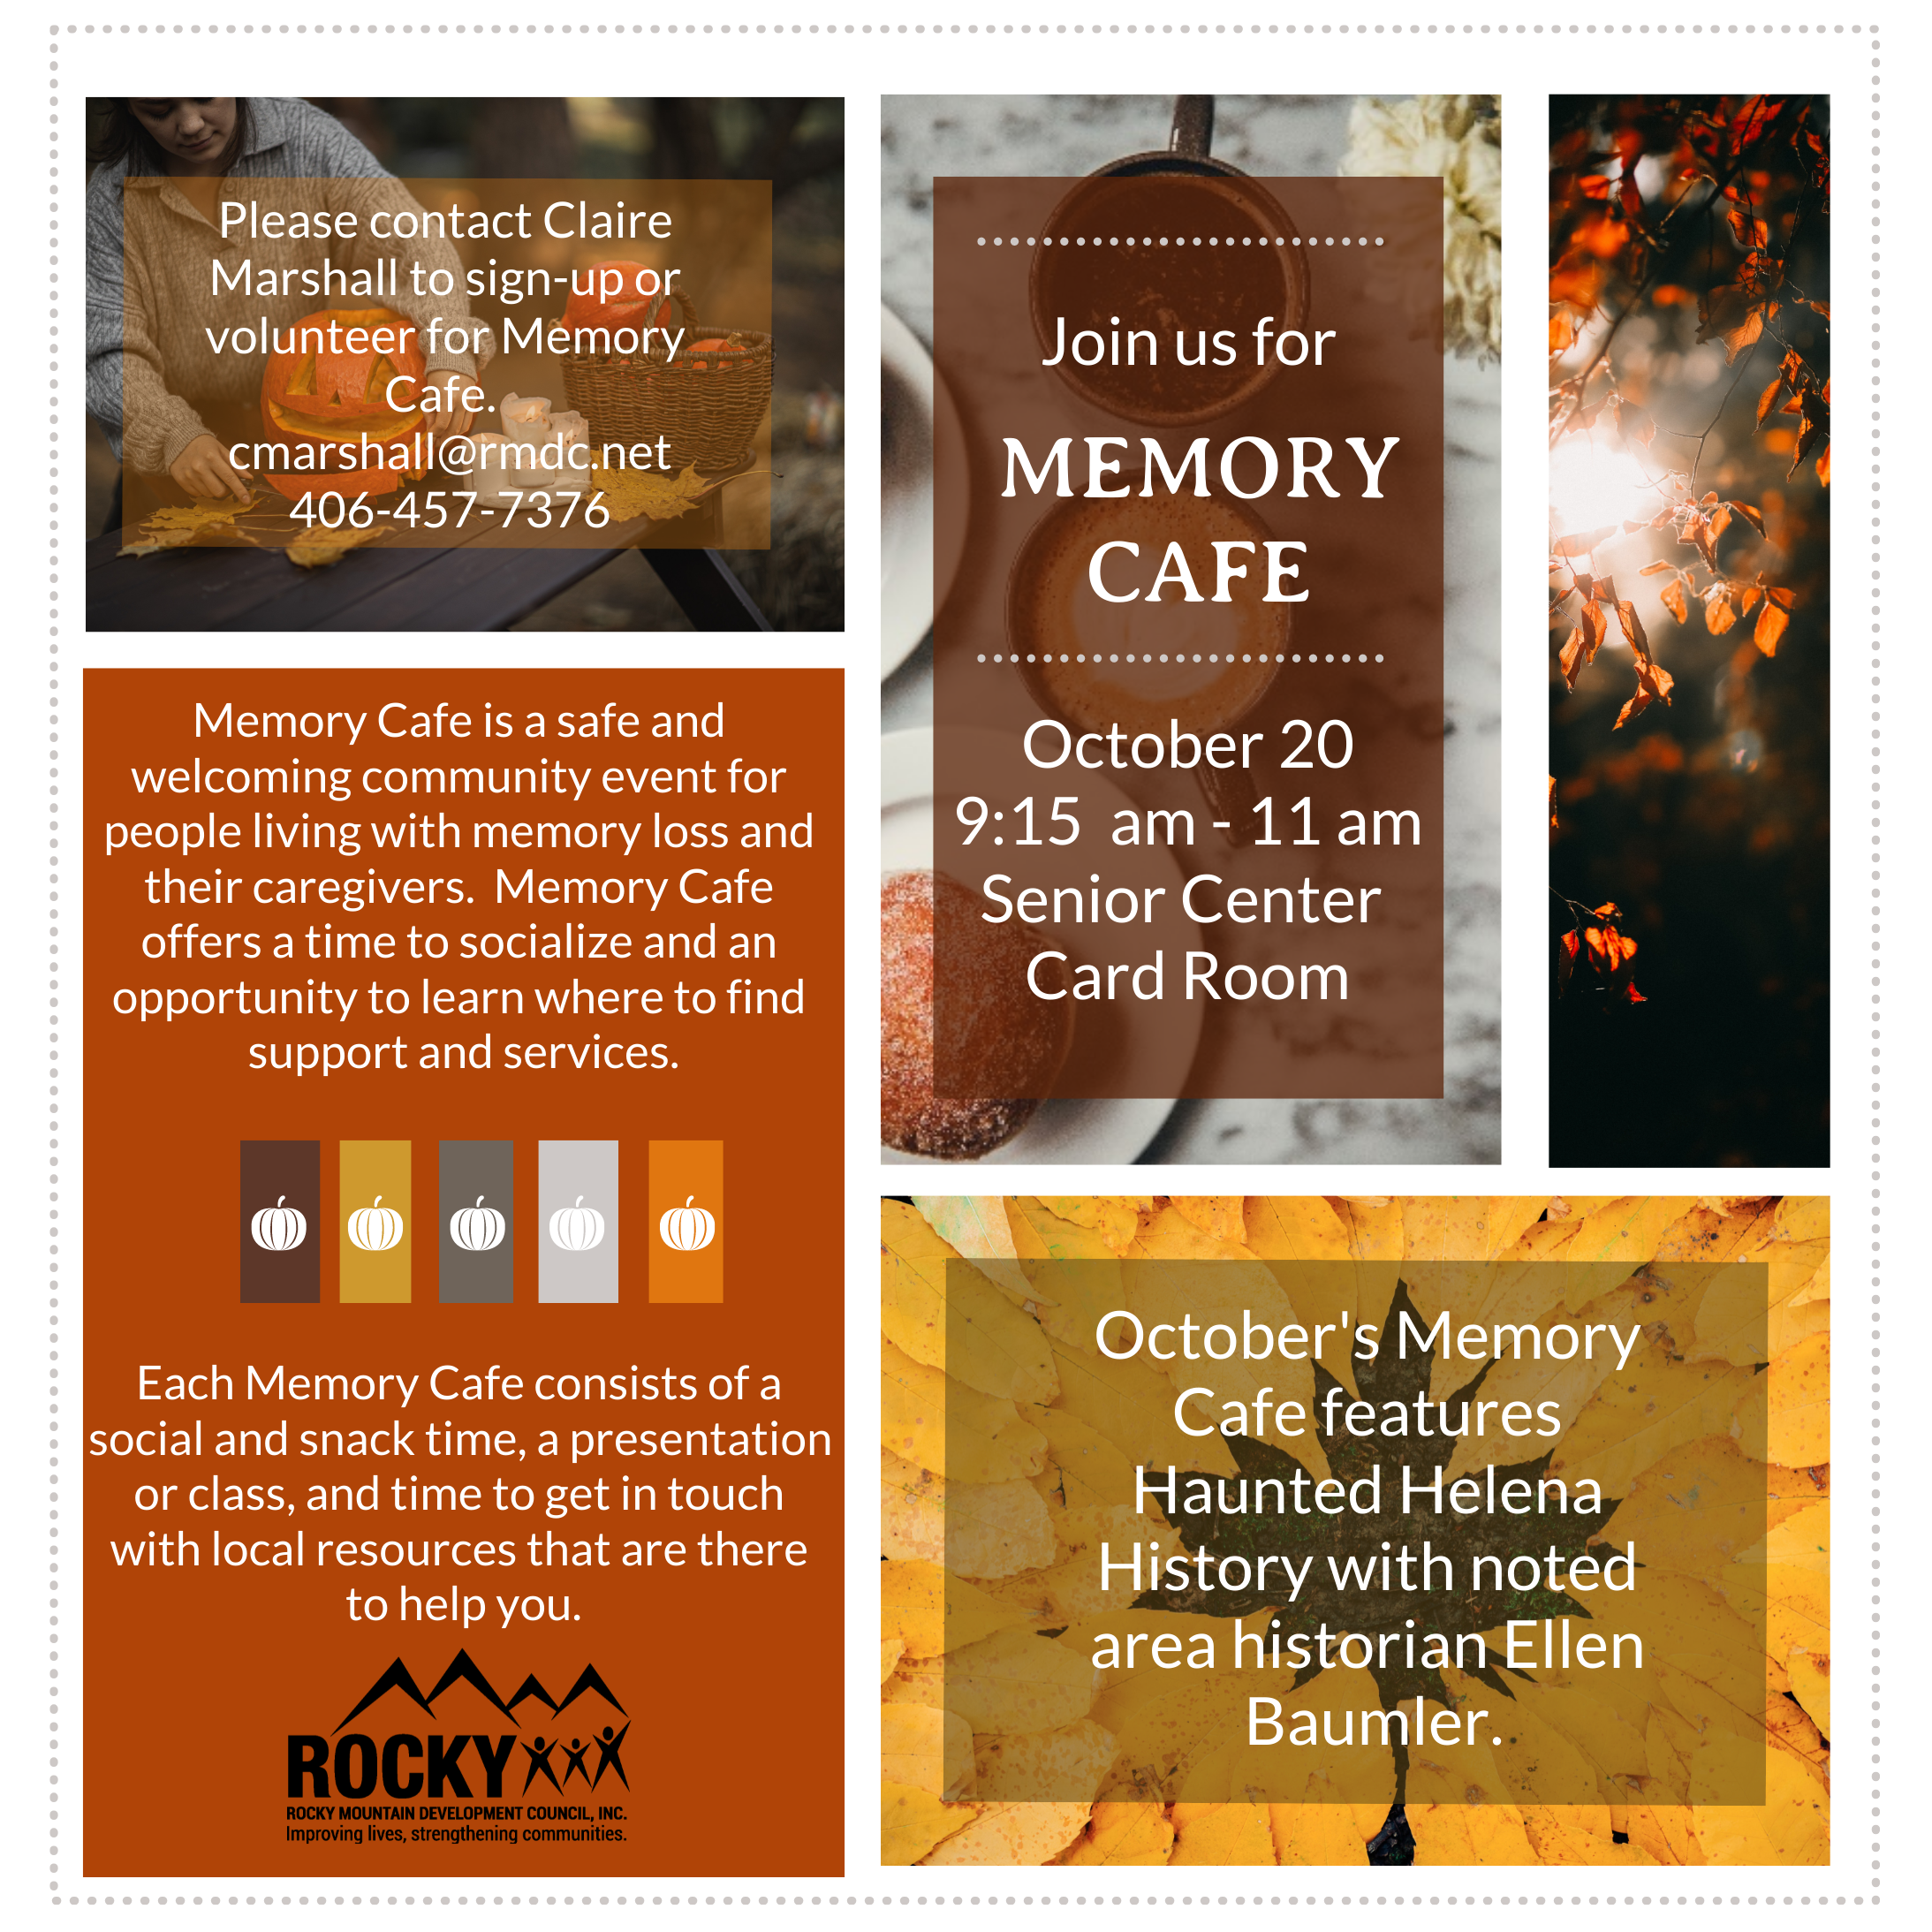 Memory Cafe is a safe and welcoming community event for people living with memory loss and their caregivers.